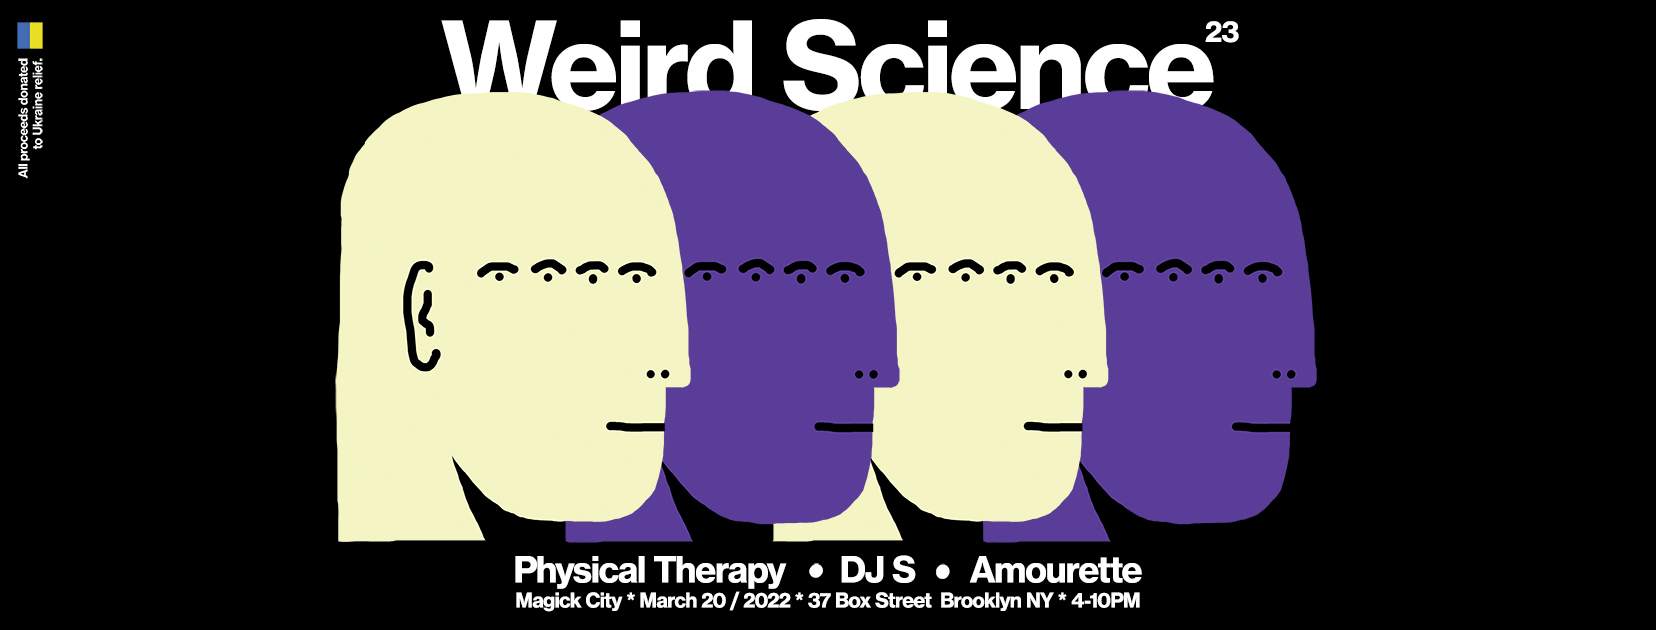 Weird Science n.23 with Physical Therapy and DJ S - Página frontal